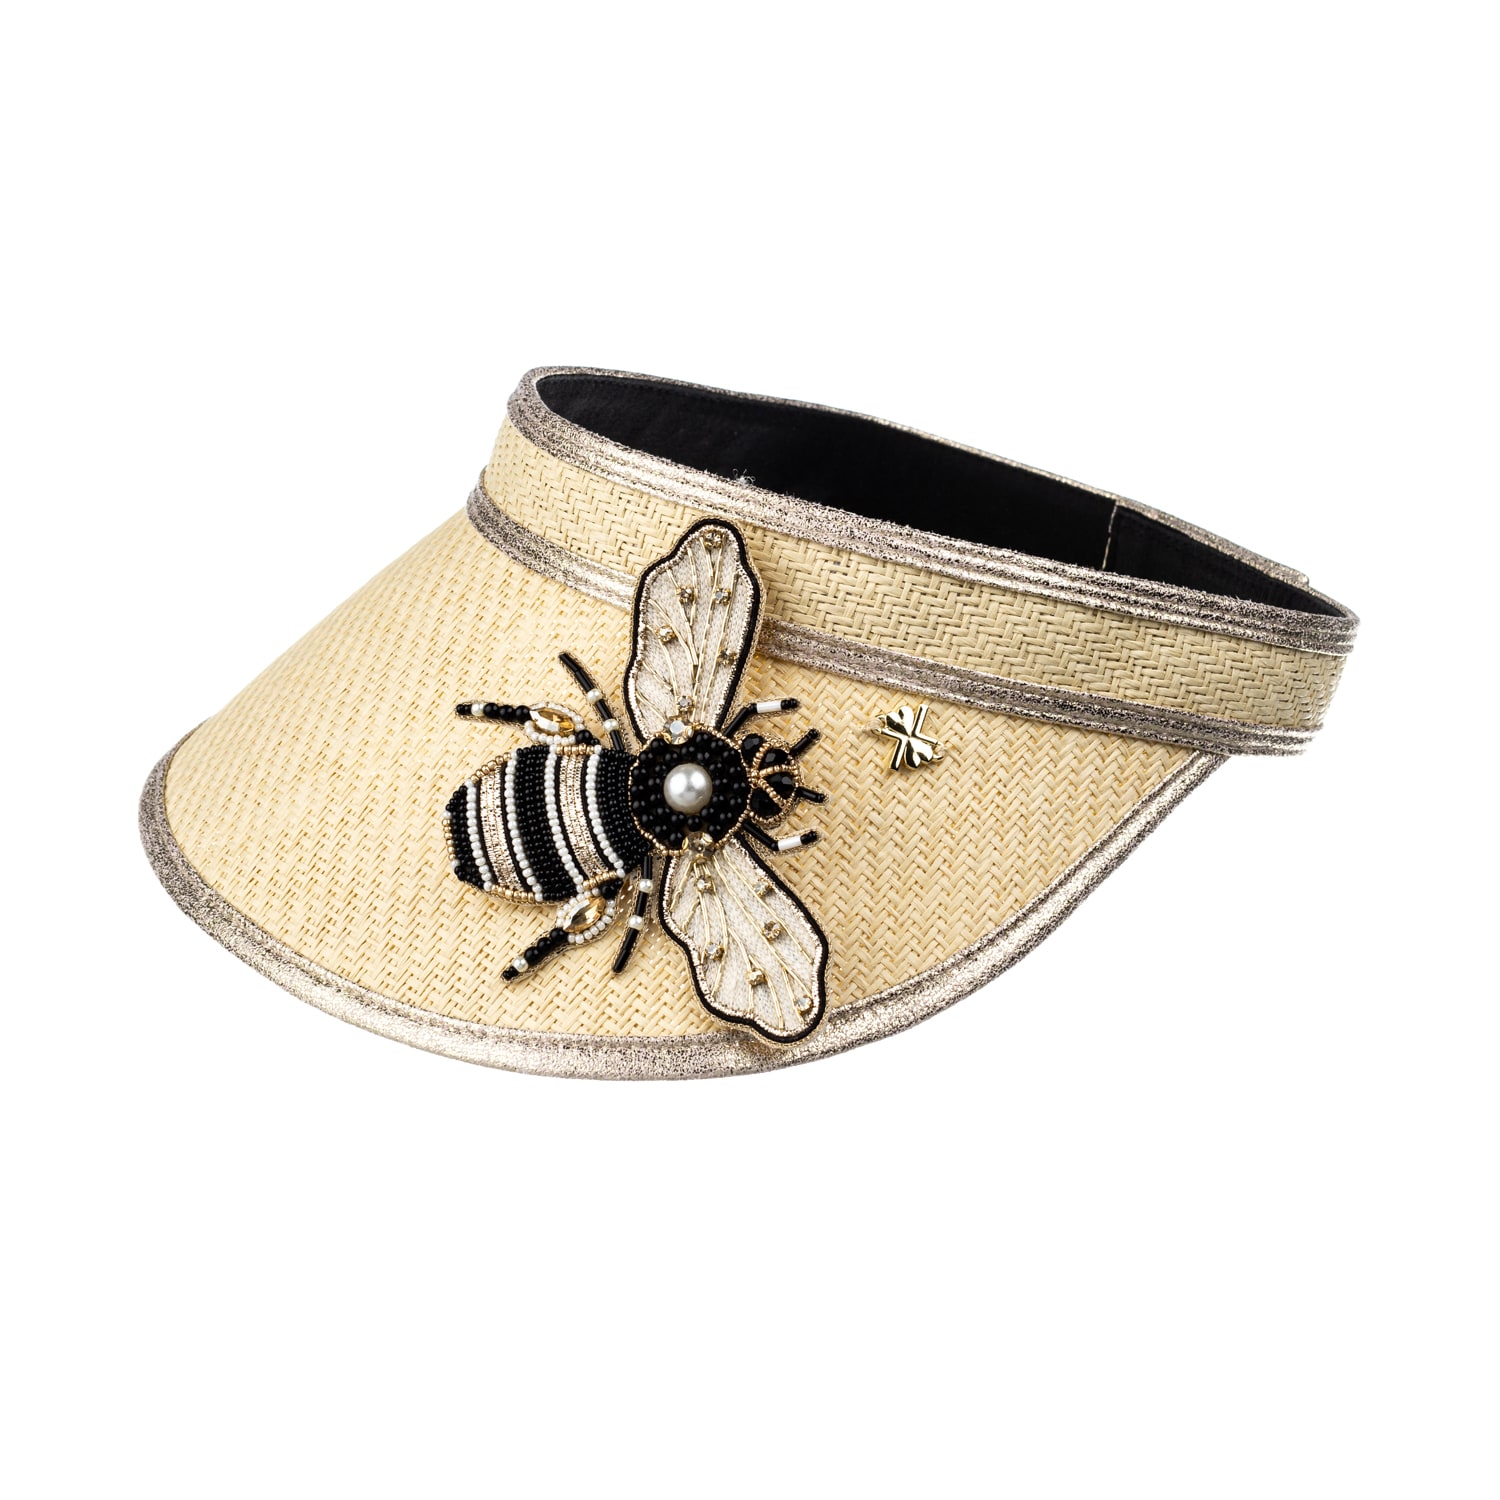 Women’s Neutrals Straw Woven Visor With Embellished Cream & Gold Bee Brooch - Cream One Size Laines London